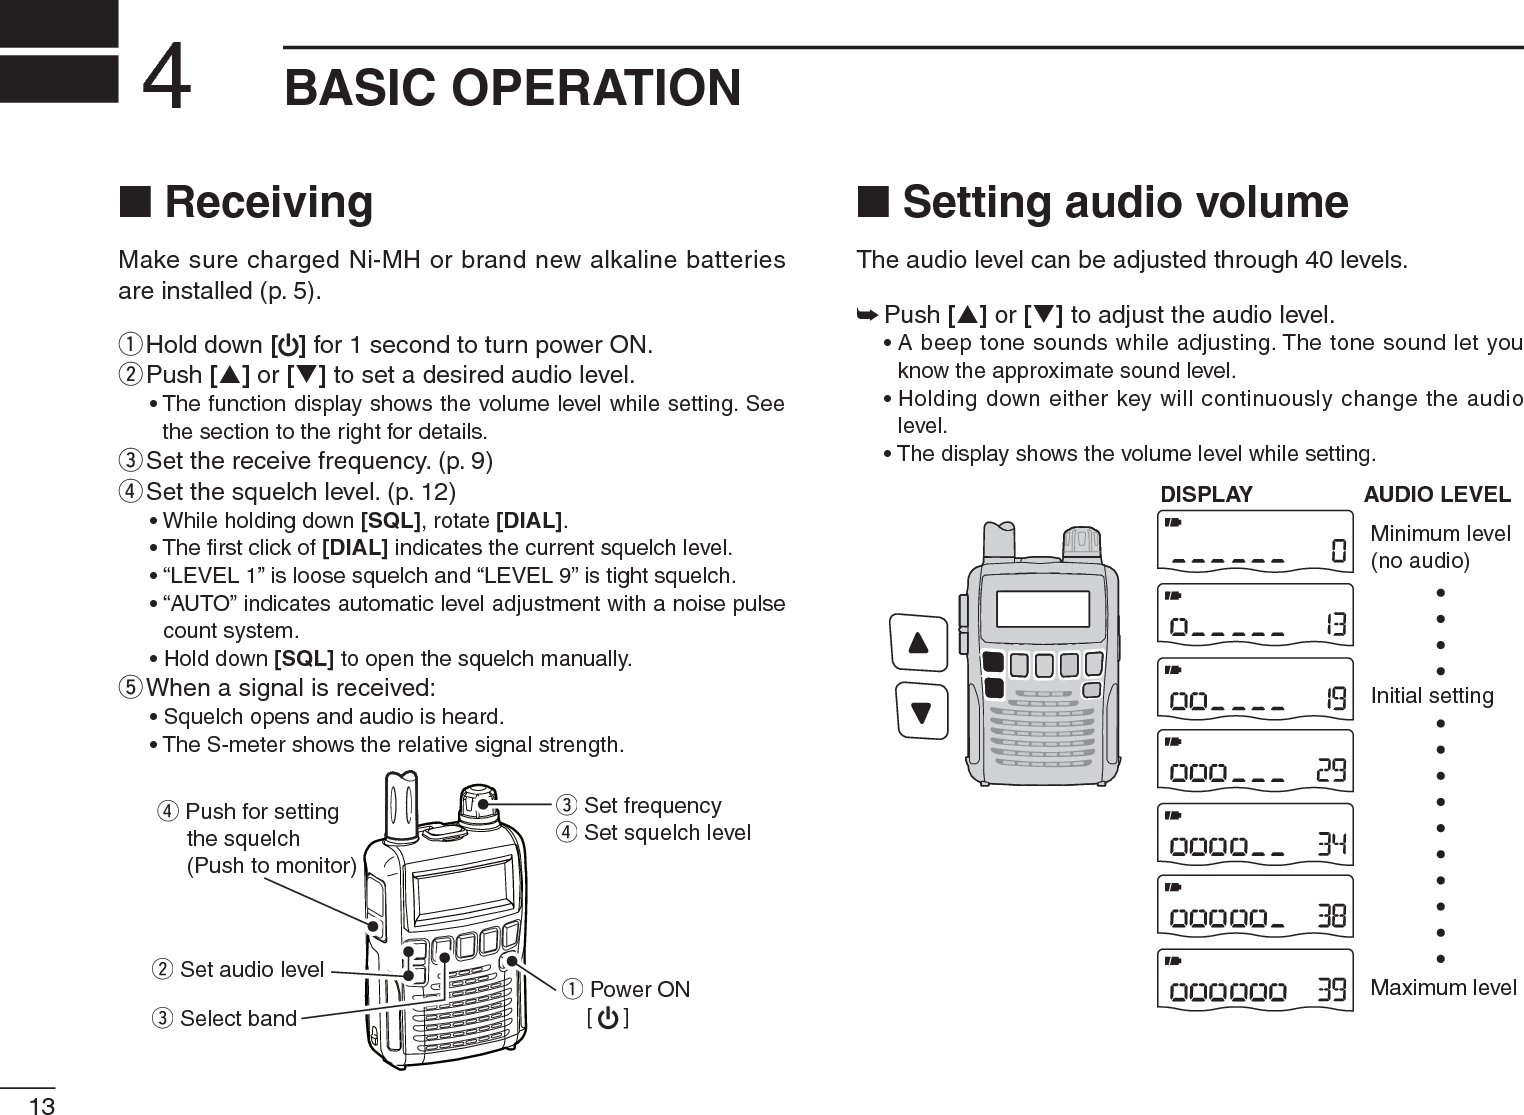 13BASIC OPERATION4N ReceivingMake sure charged Ni-MH or brand new alkaline batteries are installed (p. 5).qHold down [] for 1 second to turn power ON.wPush[S] or [T] to set a desired audio level. • The function display shows the volume level while setting. See the section to the right for details.eSet the receive frequency. (p. 9)rSet the squelch level. (p. 12)• While holding down [SQL], rotate [DIAL].• The ﬁrst click of [DIAL] indicates the current squelch level.• “LEVEL 1” is loose squelch and “LEVEL 9” is tight squelch.• “AUTO” indicates automatic level adjustment with a noise pulse count system.• Hold down [SQL] to open the squelch manually.t  When a signal is received:• Squelch opens and audio is heard.• The S-meter shows the relative signal strength.qPower ON    [ ]e Set frequencyr Set squelch levelw Set audio levele Select bandr Push for settingthe squelch(Push to monitor)NSetting audio volumeThe audio level can be adjusted through 40 levels.±Push [S] or [T] to adjust the audio level. • A beep tone sounds while adjusting. The tone sound let you know the approximate sound level.• Holding down either key will continuously change the audio level.• The display shows the volume level while setting.AUDIO LEVELMinimum level(no audio)Maximum levelInitial settingDISPLAY